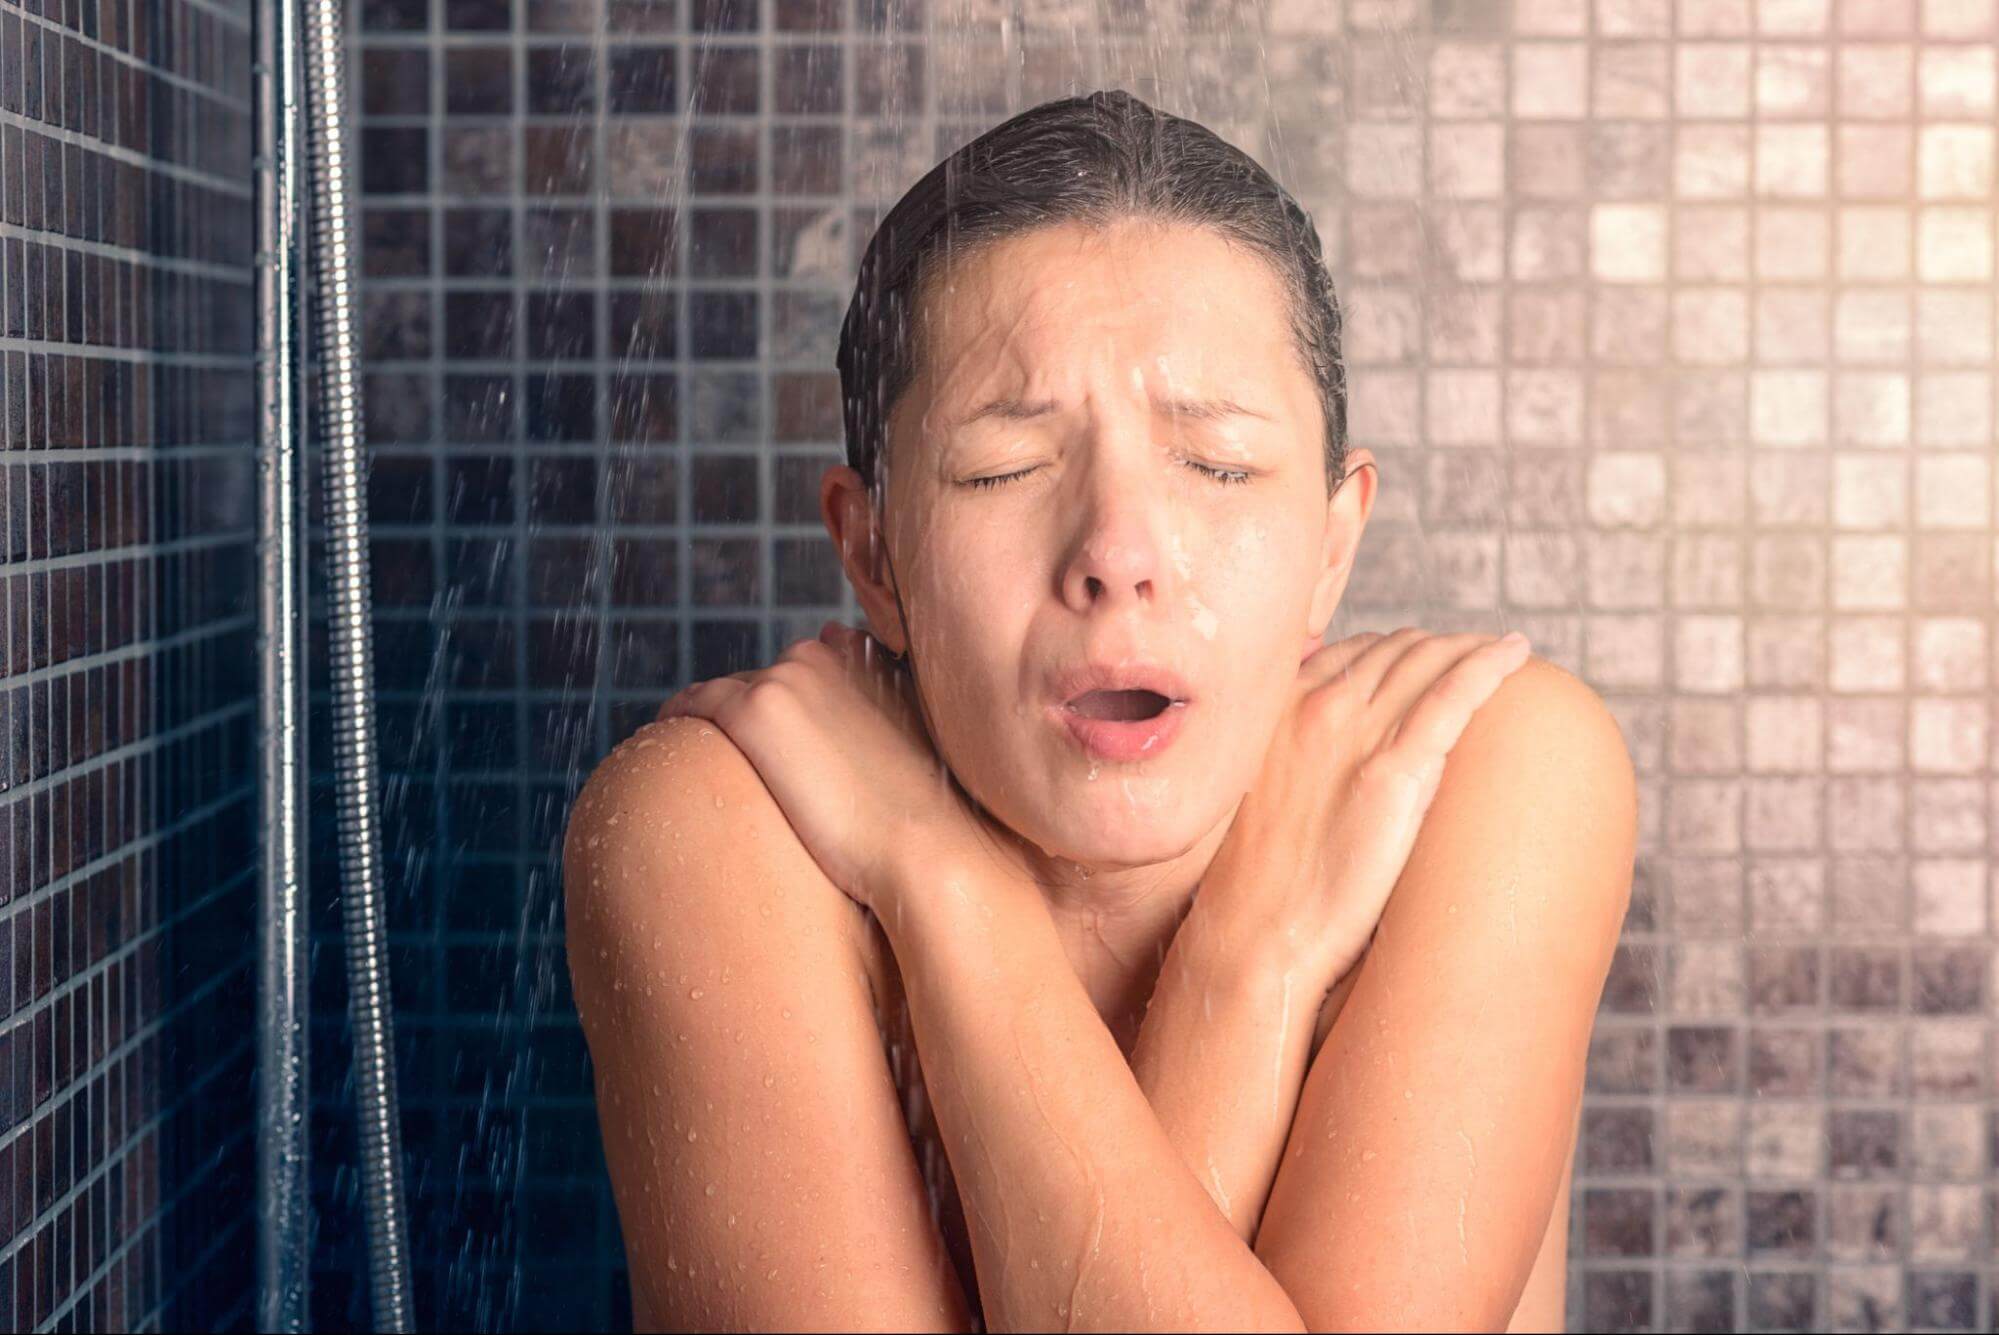 A woman shivers uncontrollably while taking a cold shower.